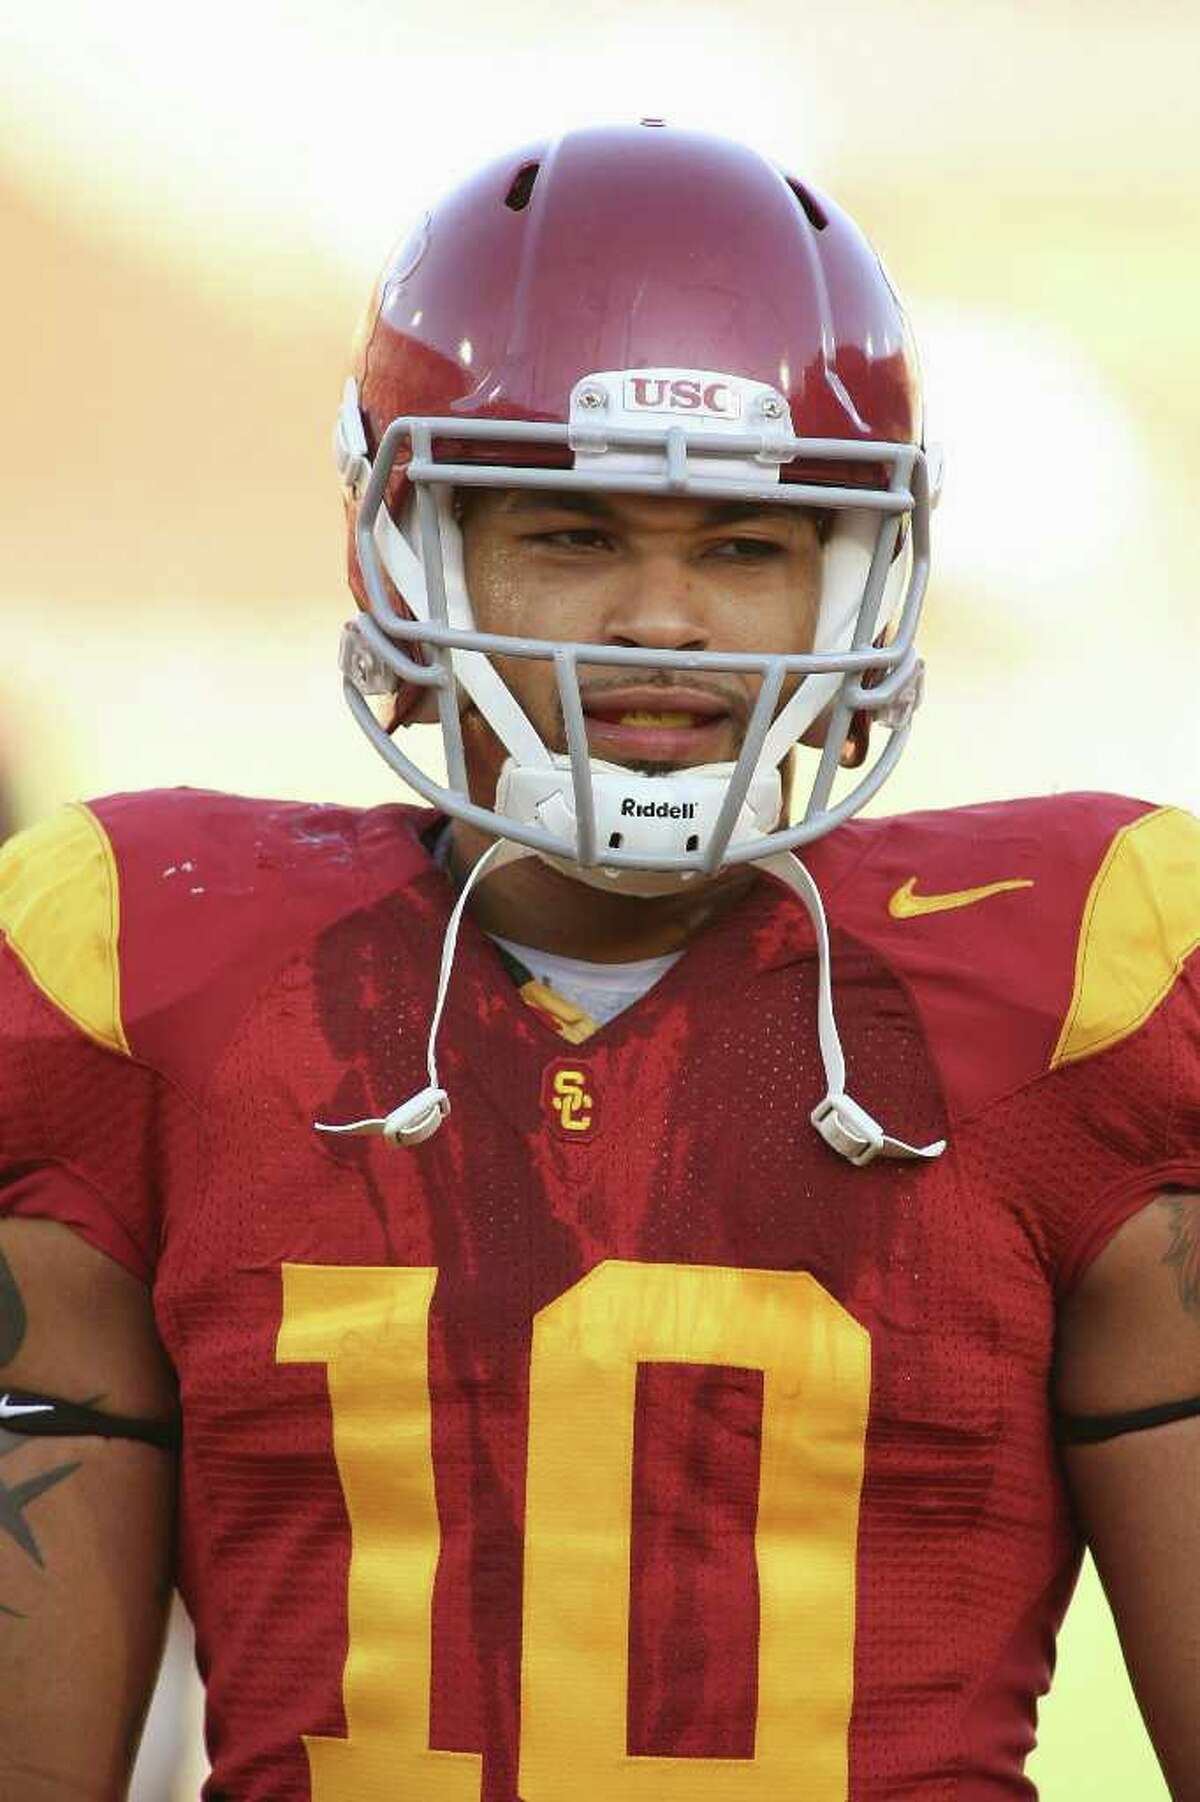 LOS ANGELES, CA - OCTOBER 24: D.J. Shoemate #10 of the USC Trojans looks on before the game against the Oregon State Beavers on October 24, 2009 at the Los Angeles Coliseum in Los Angeles, California. USC won 42-36. (Photo by Jeff Golden/Getty Images)